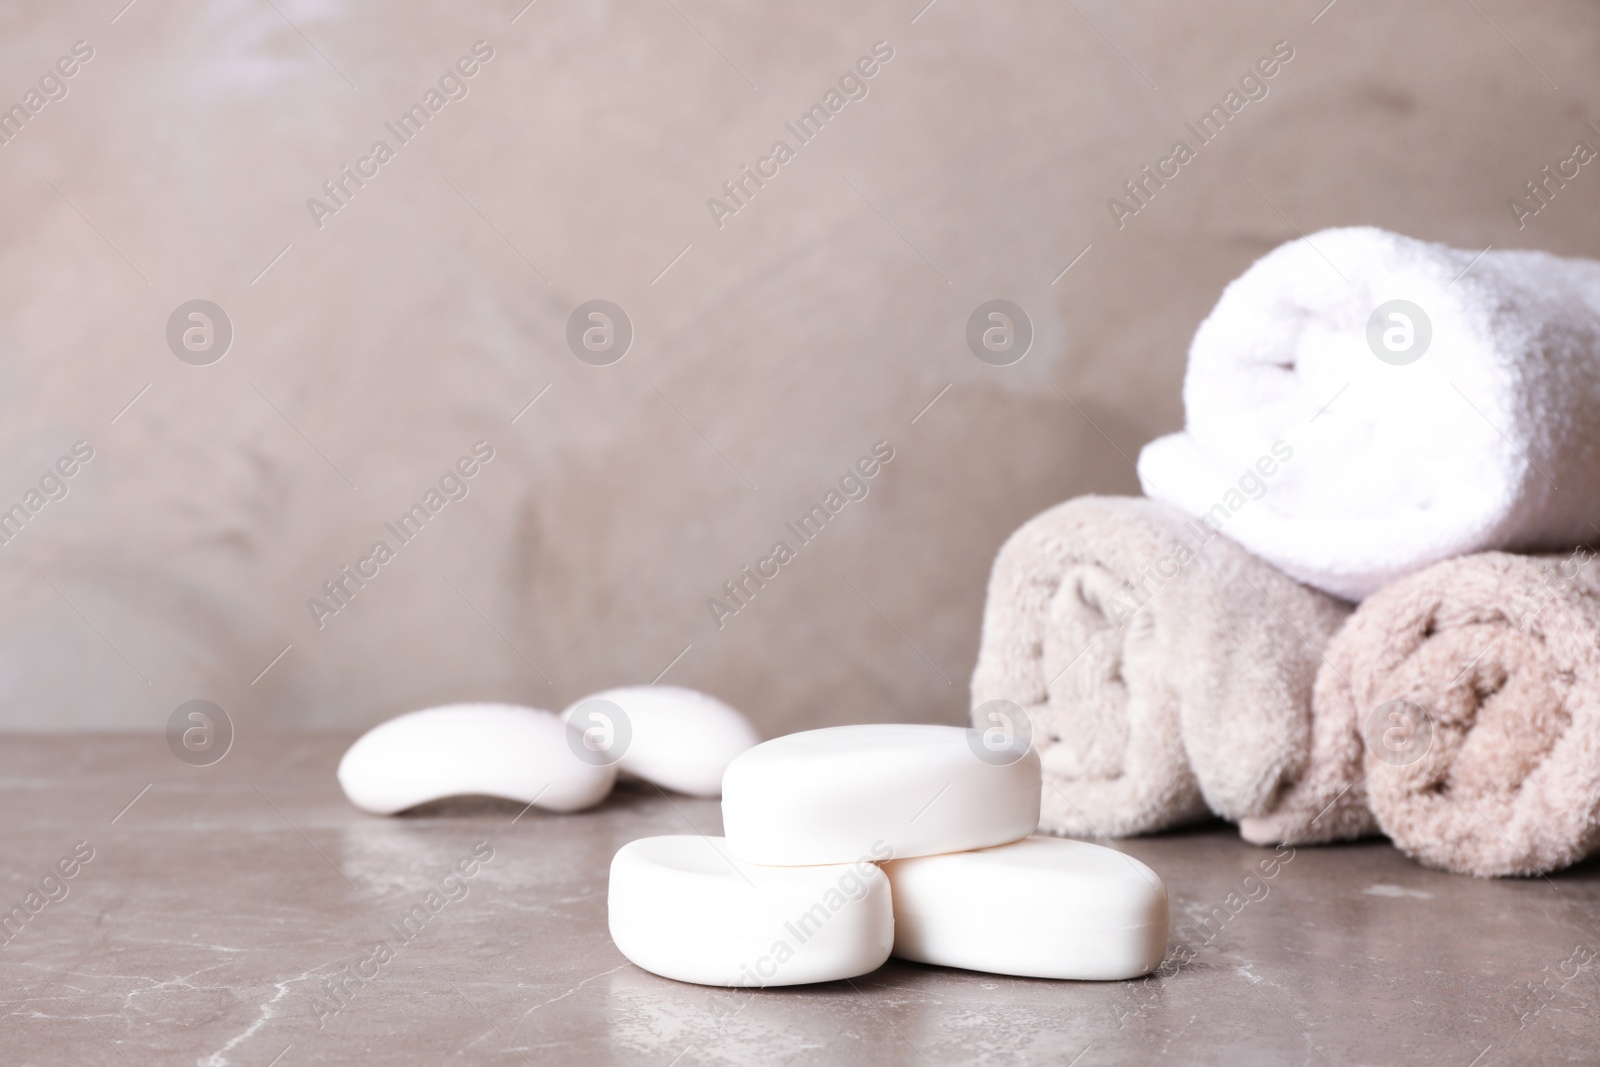 Photo of Soap bars and towels on color table. Space for text